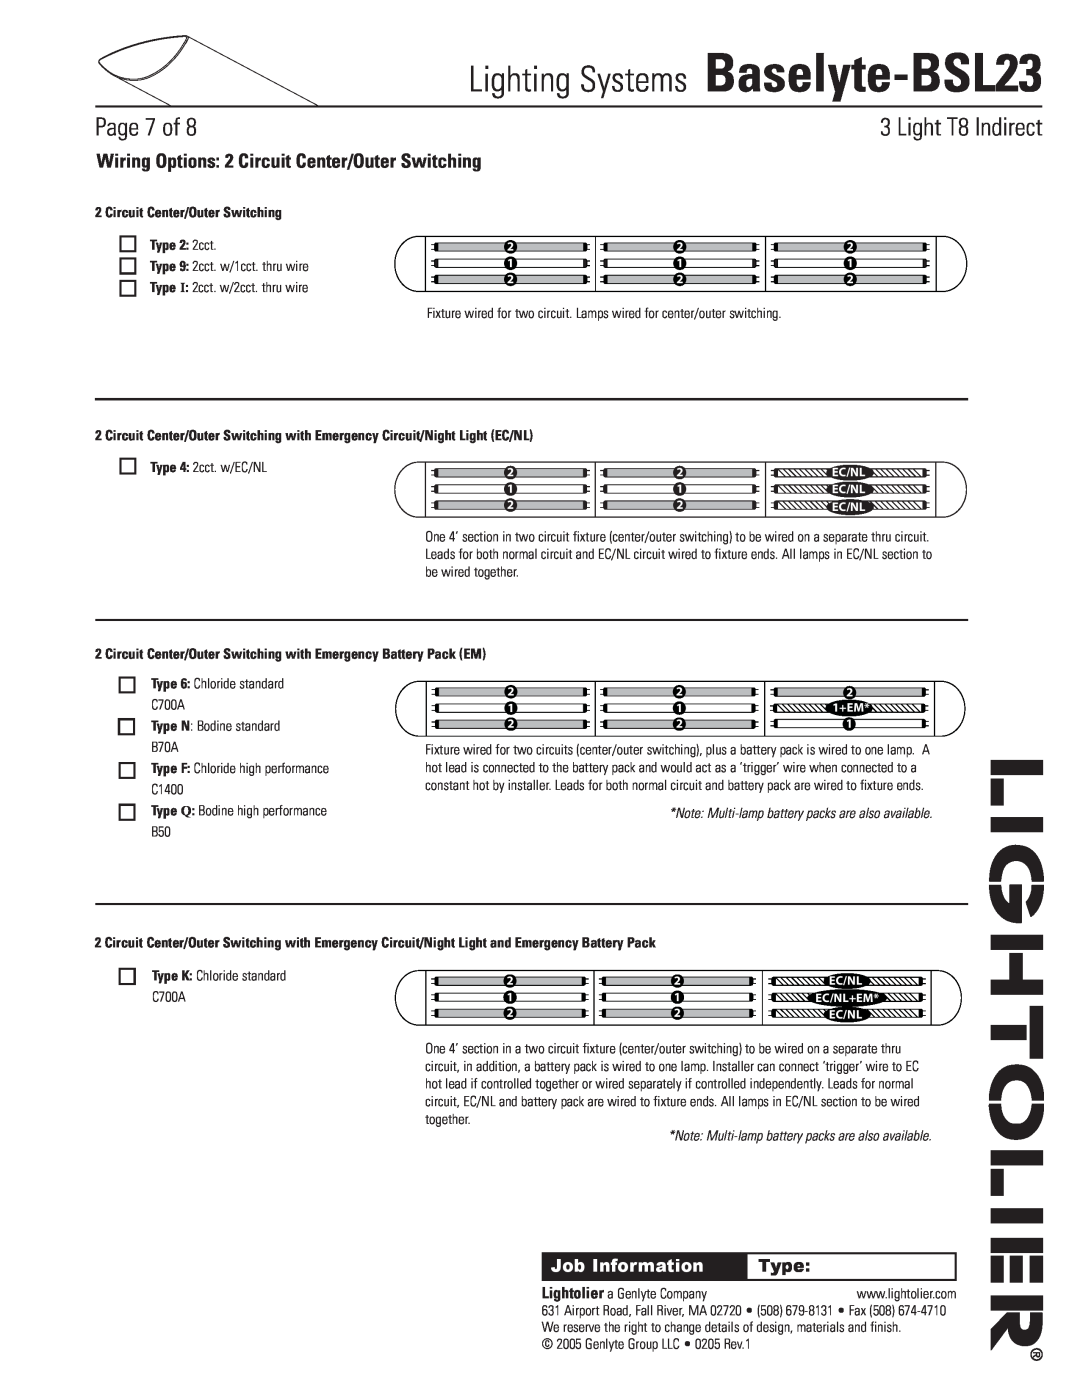 Lightolier Baselyte-BSL23 Wiring Options 2 Circuit Center/Outer Switching, Circuit Center/Outer Switching Type 2 2cct 